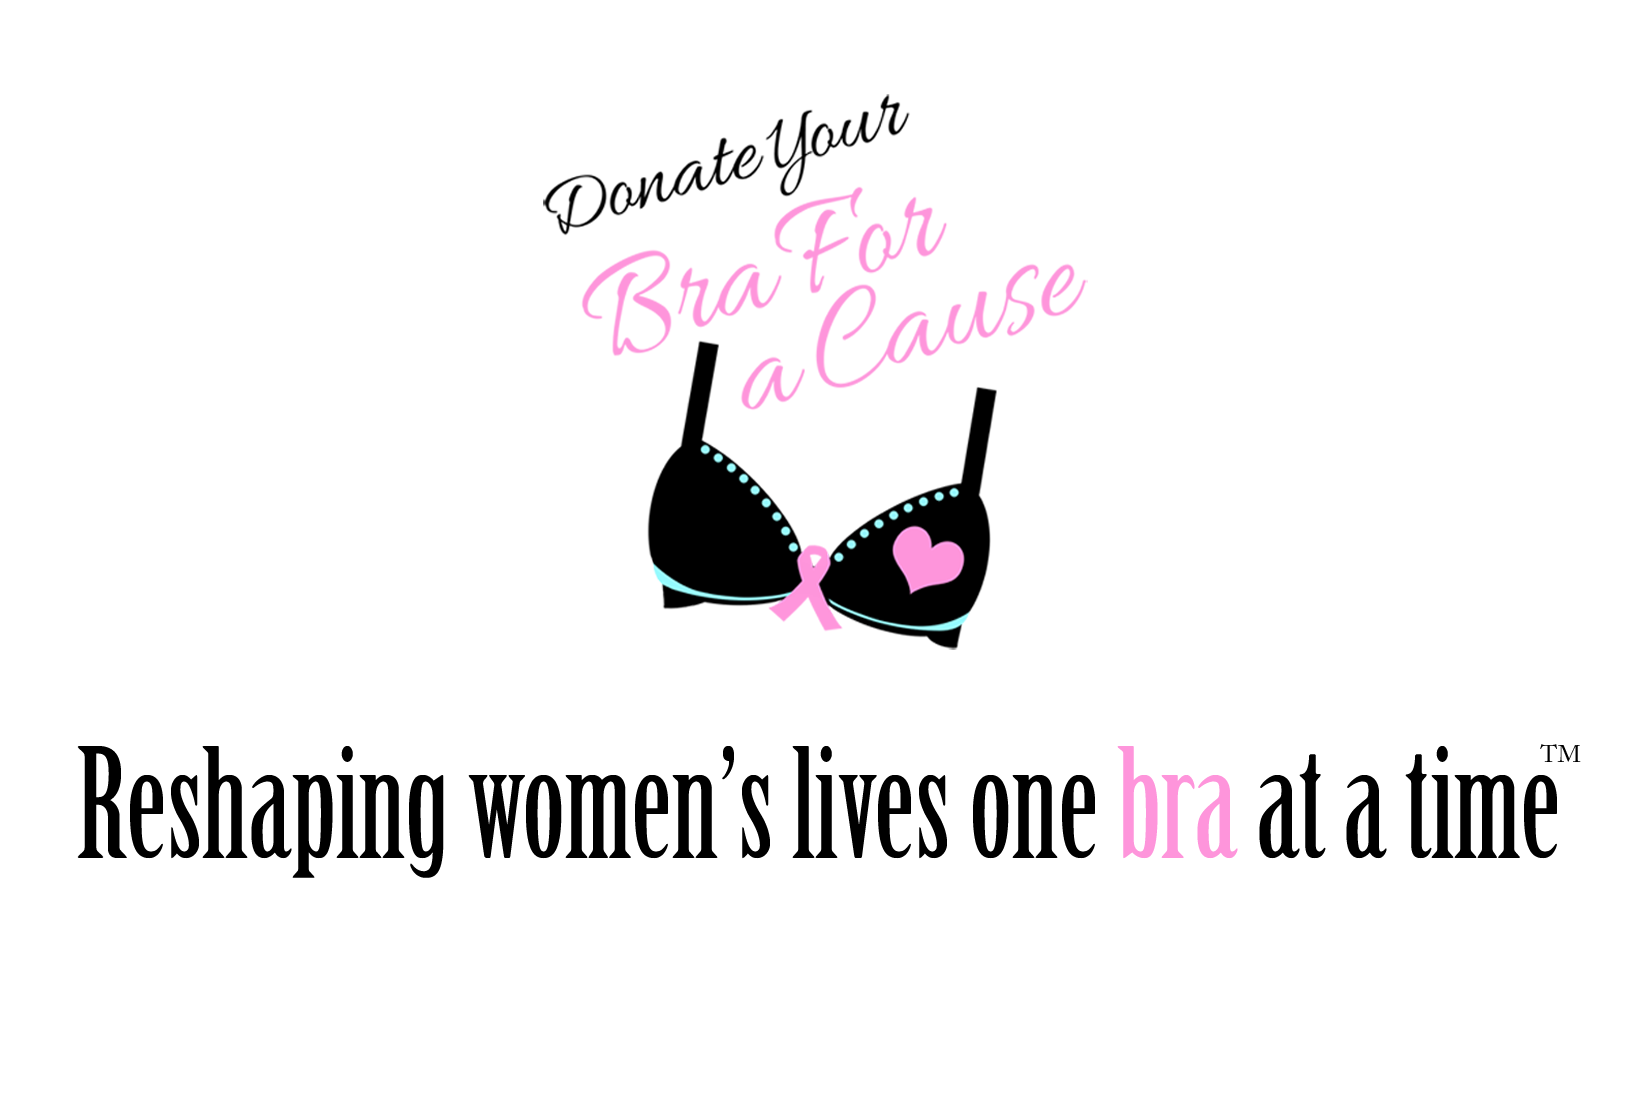 https://donateyourbras.com/wp-content/uploads/2019/02/1100x1650-banner-white.png